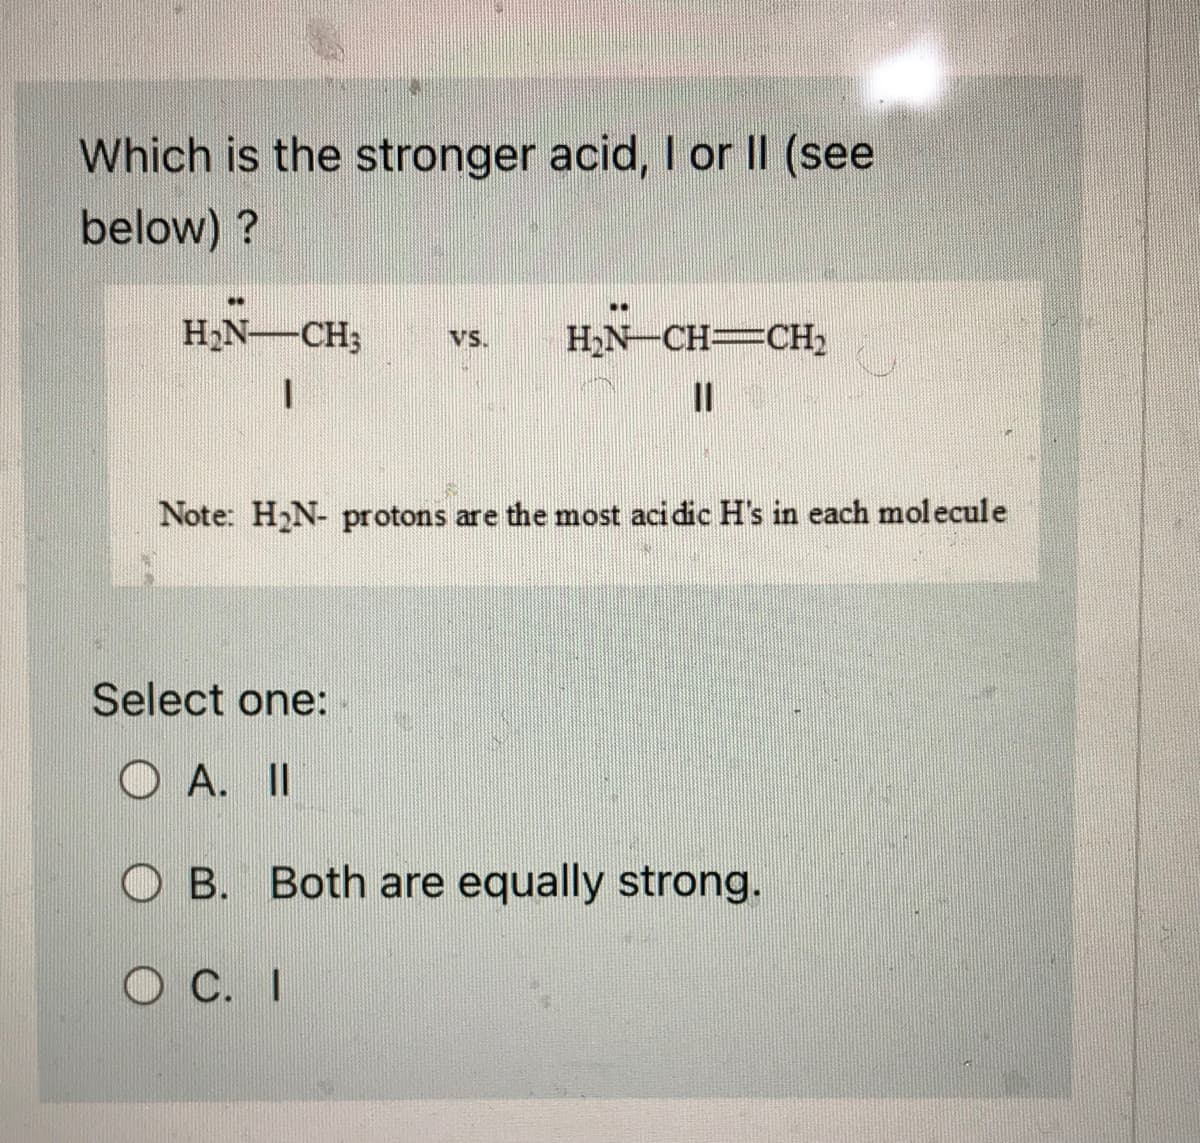 Which is the stronger acid, I or II (see
below)?
**
H₂N-CH₂
VS. H₂N-CH=CH₂
11
Note: H₂N- protons are the most acidic H's in each molecule
Select one:
OA. II
OB. Both are equally strong.
O C. I